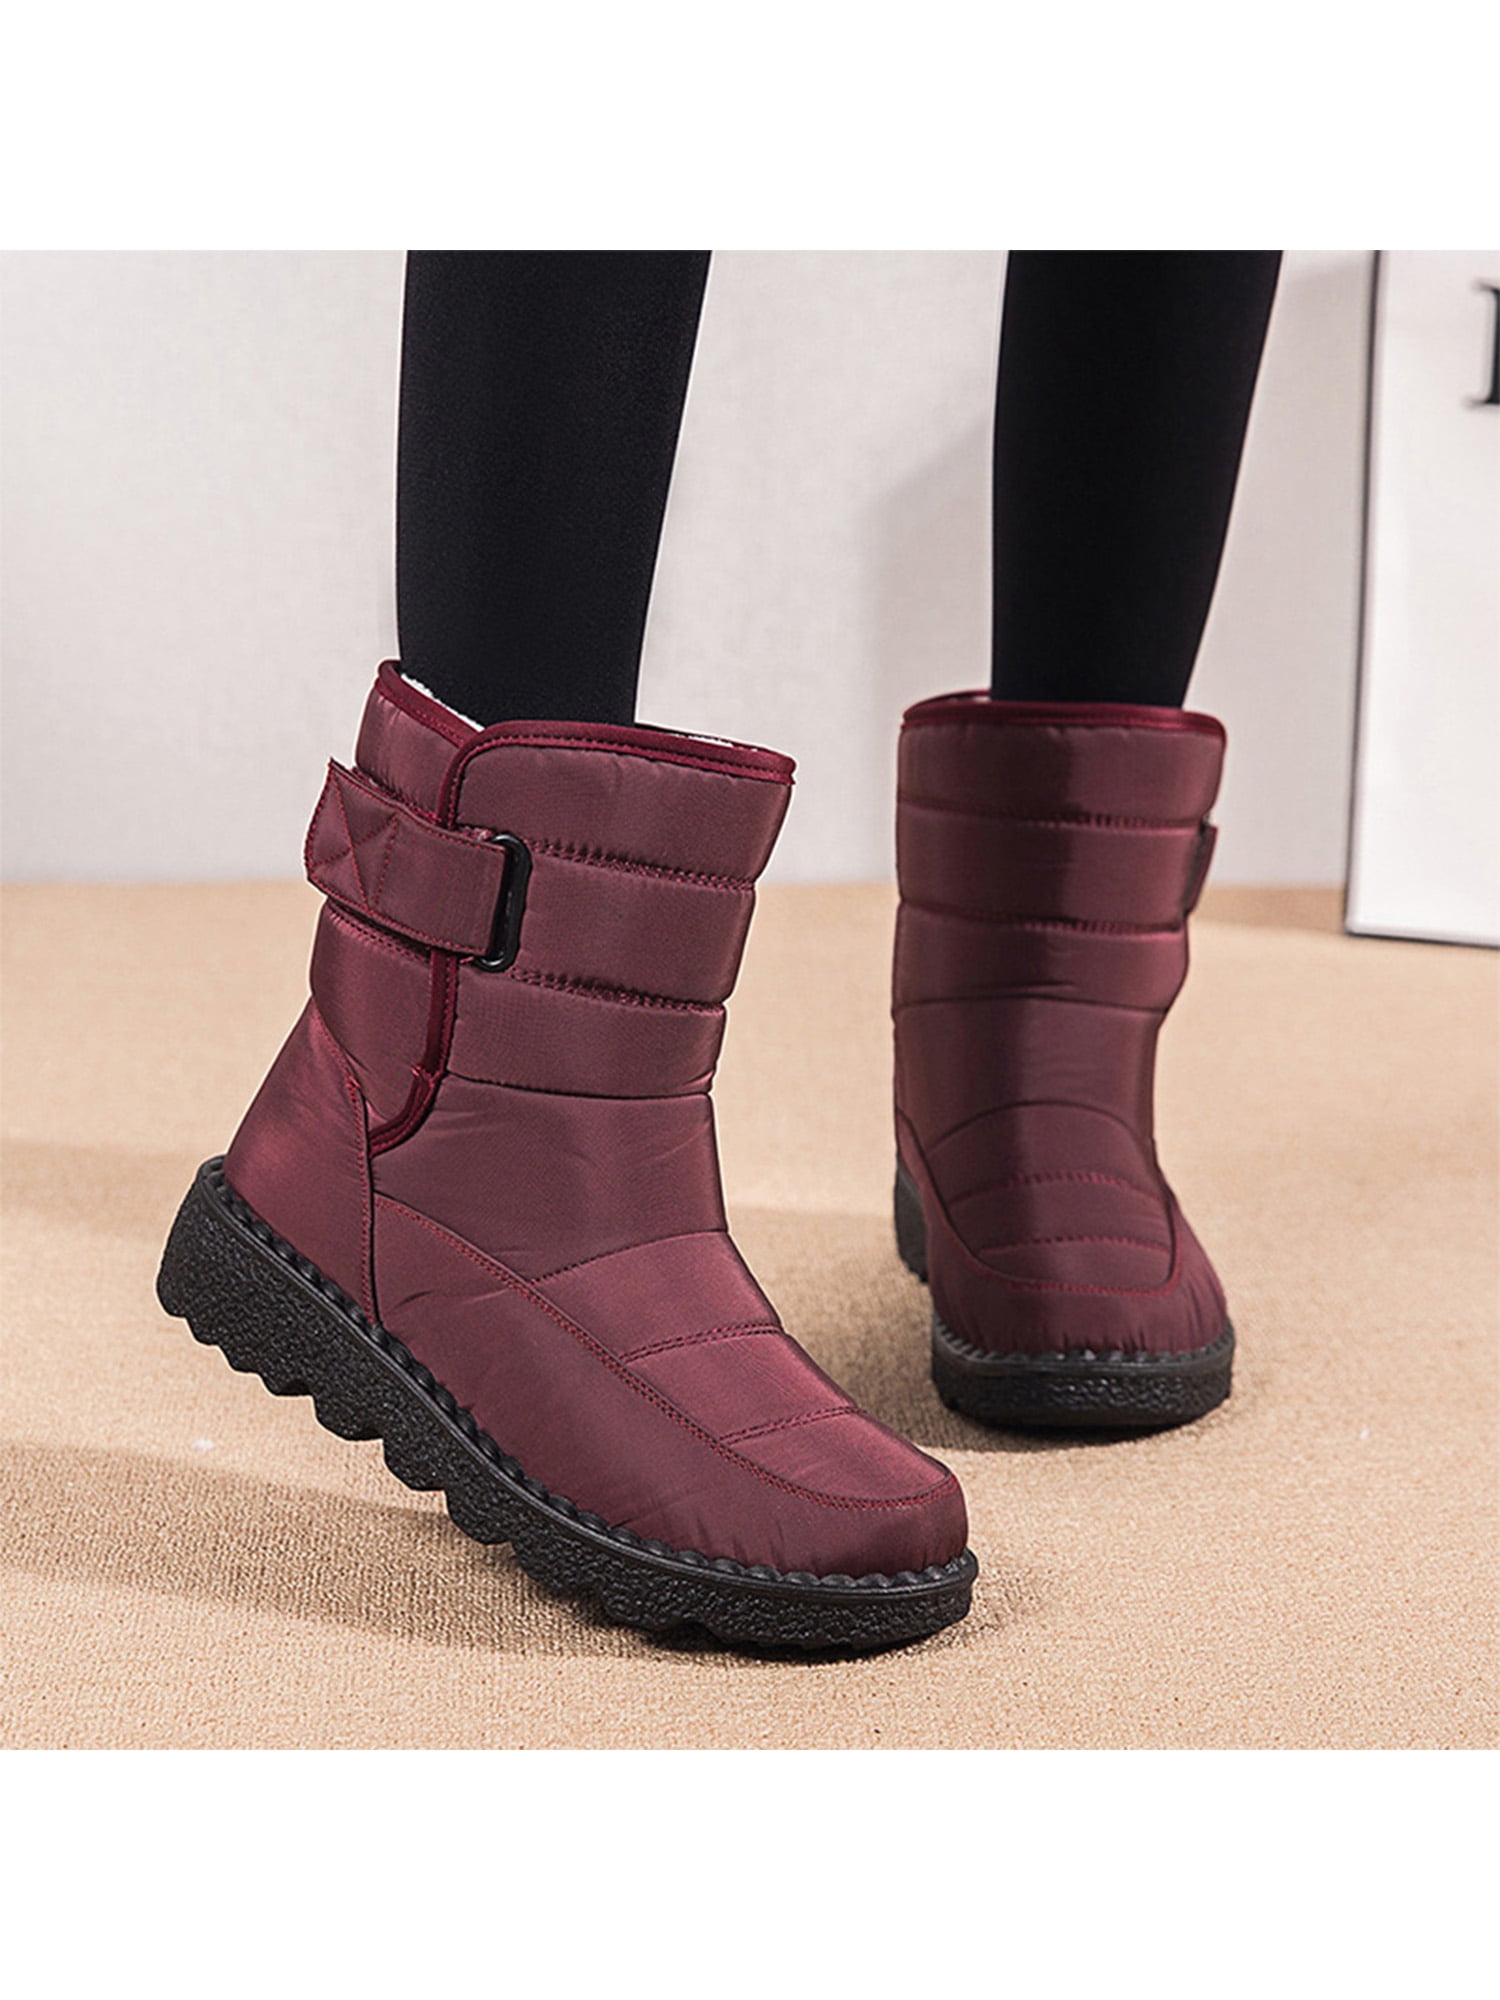 XIANV Warm Winter Boots Women Denim Jeans Boots Snow Classic High Top Round Toe Casual Shoes Sneakers